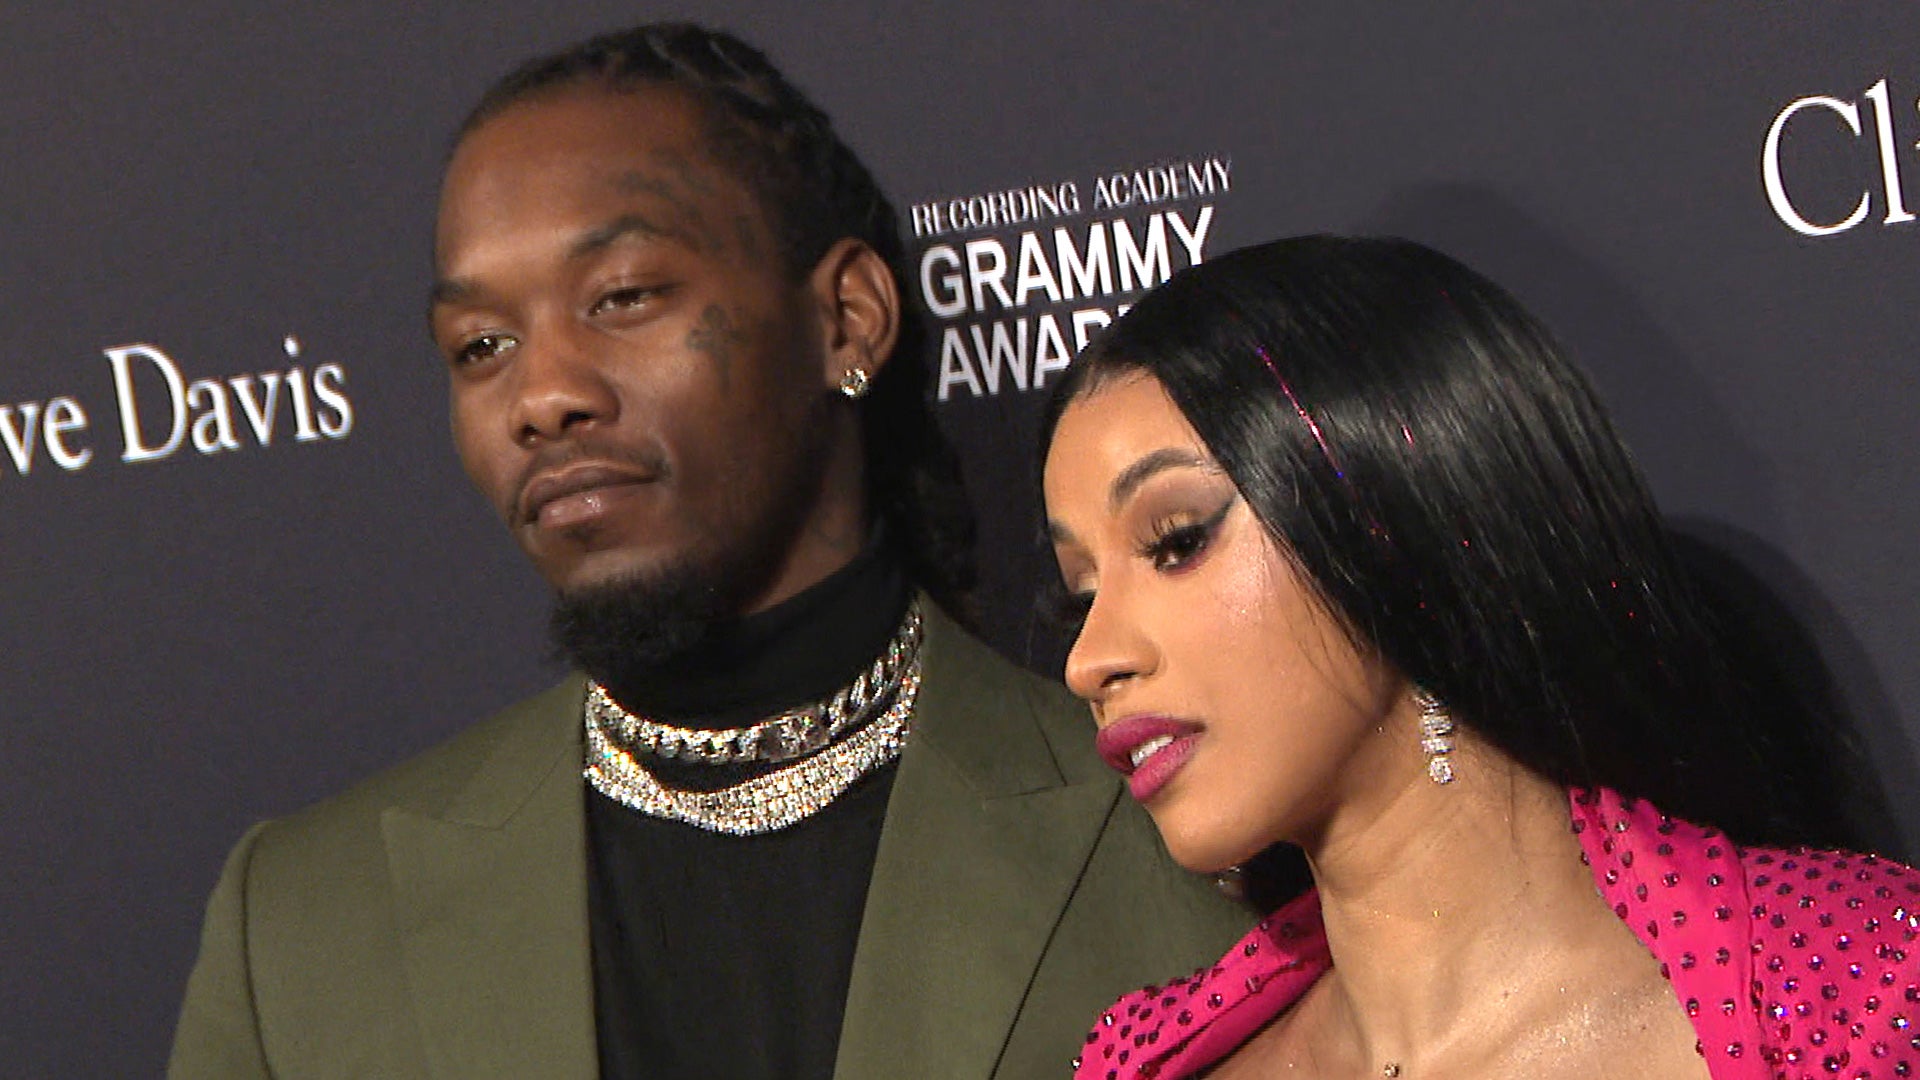 Cardi B Opened Up About Her Relationship With Offset and Cheating